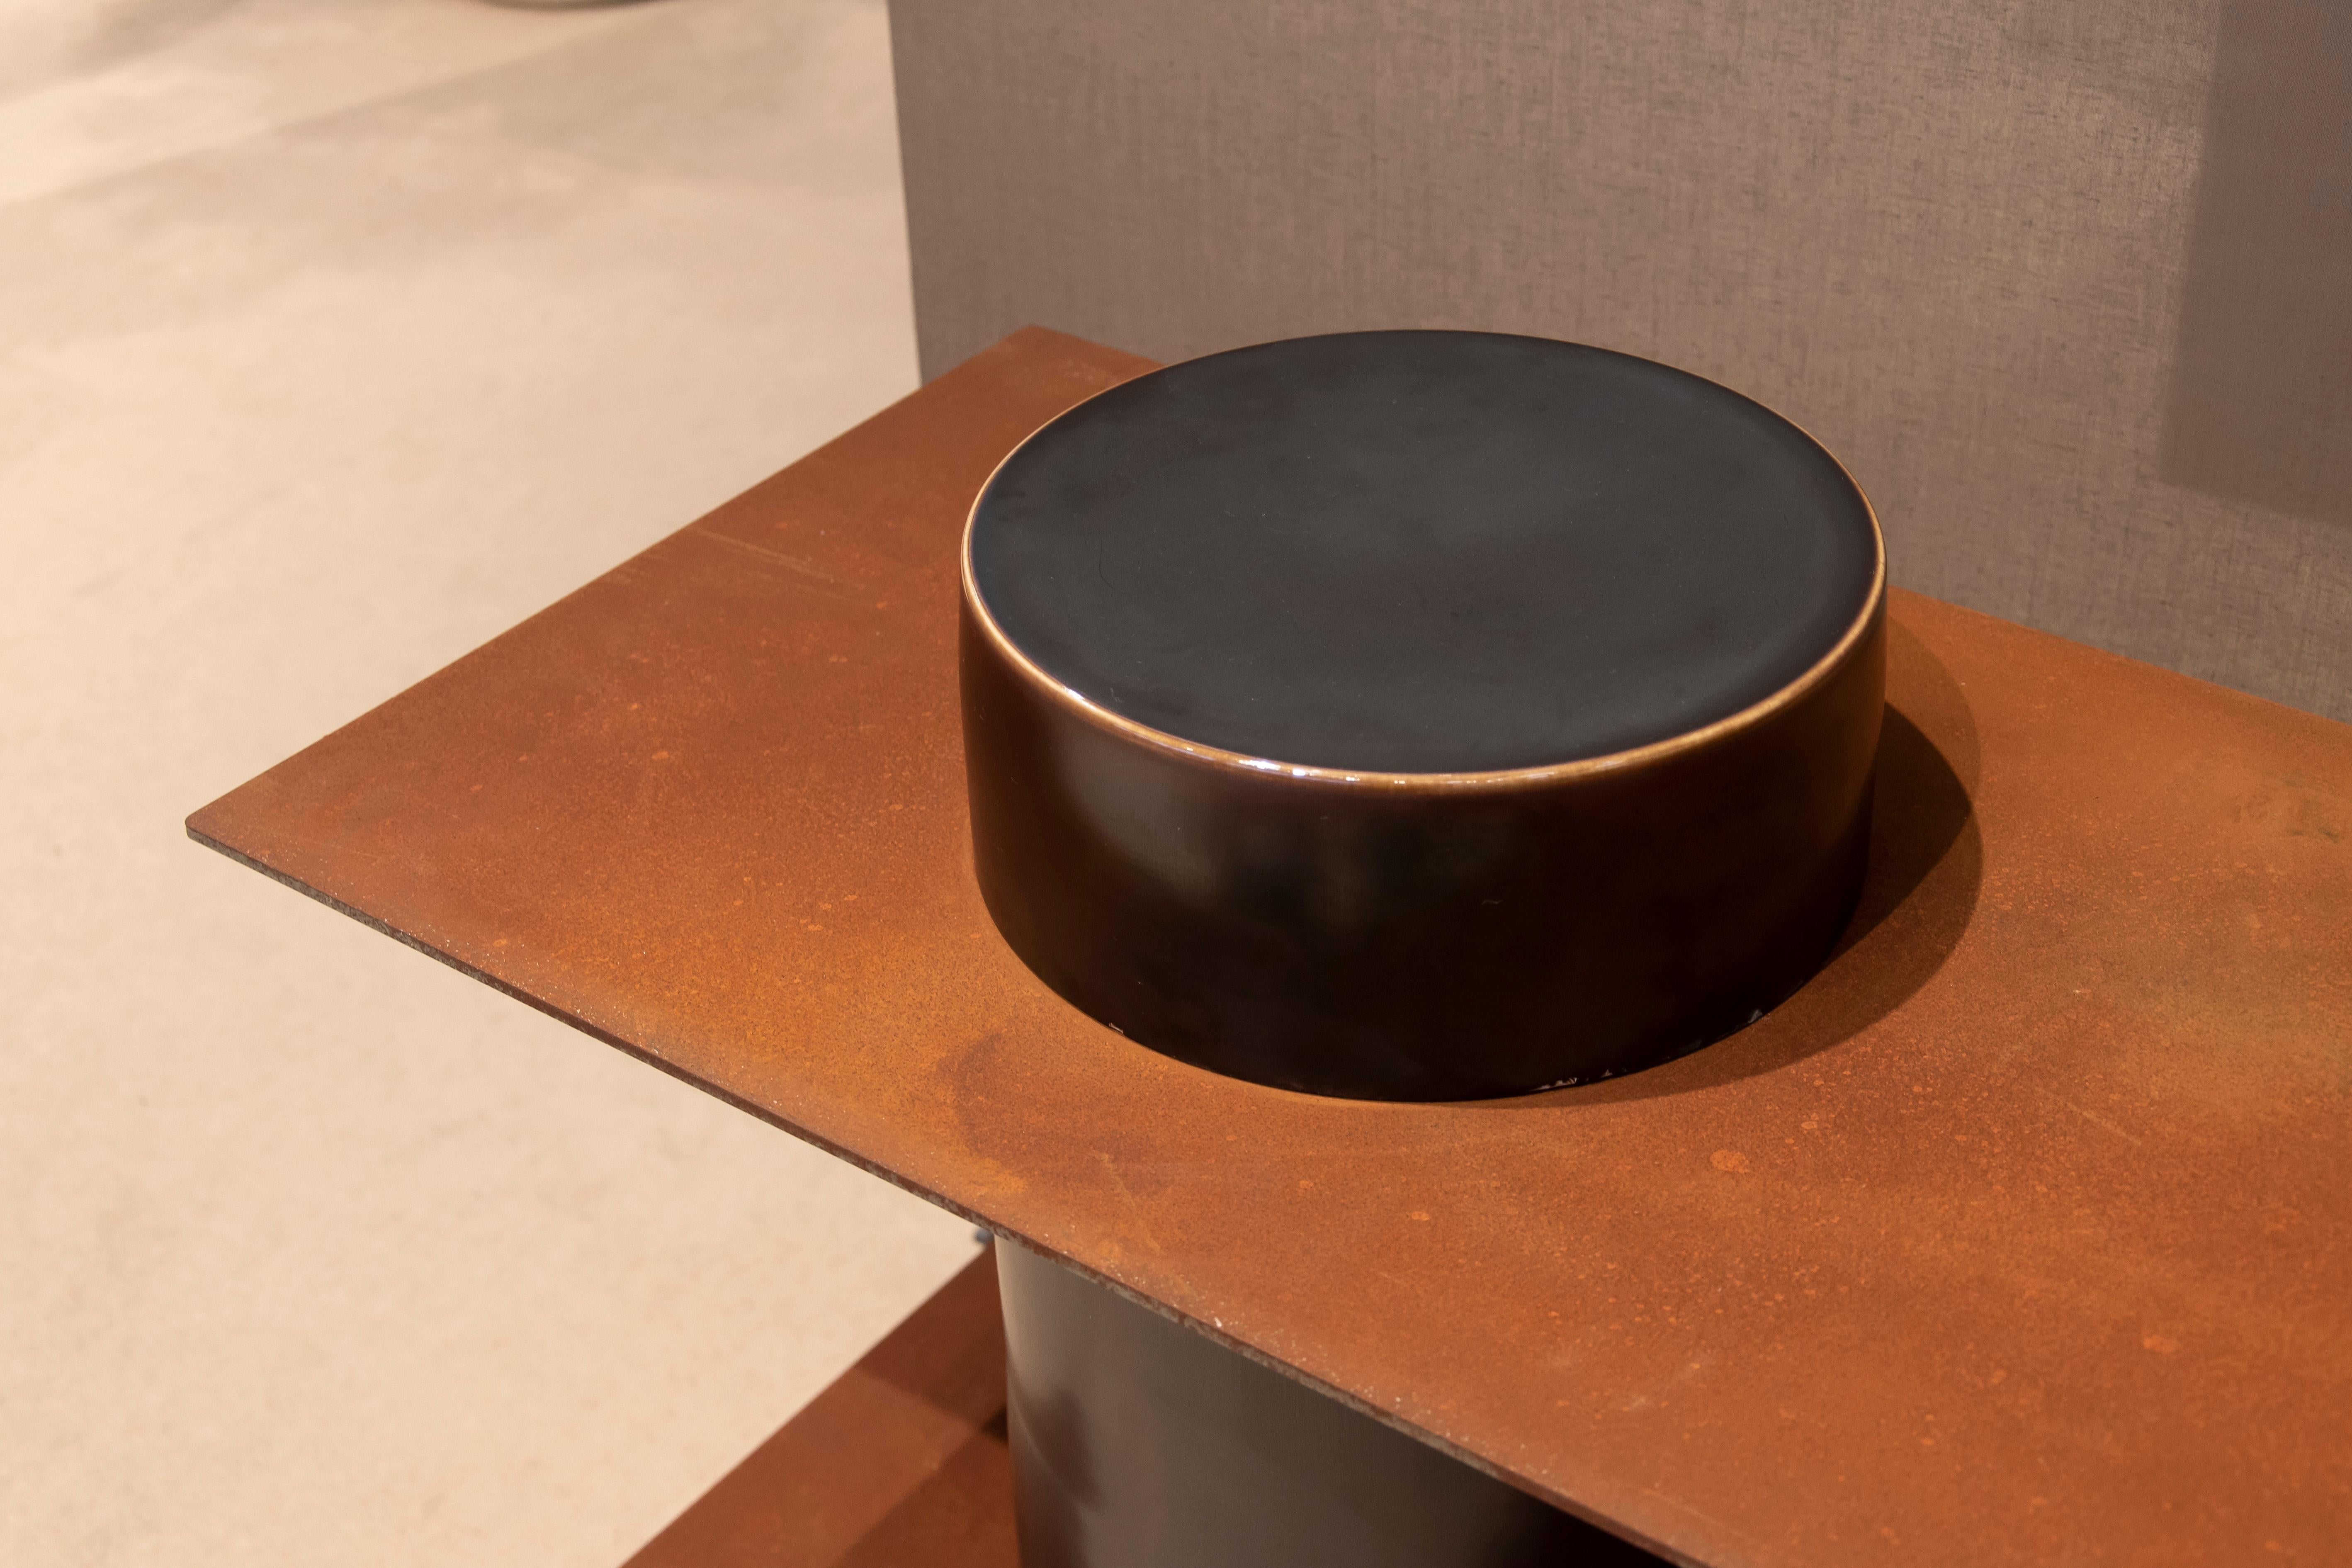 Porcelain cylinders and corten steel plates form the basic elements of this series, with which it is possible to create shelving, side tables, low tables and stools. The porcelain parts are hand thrown, trimmed, glazed and fired at 1300 C by the